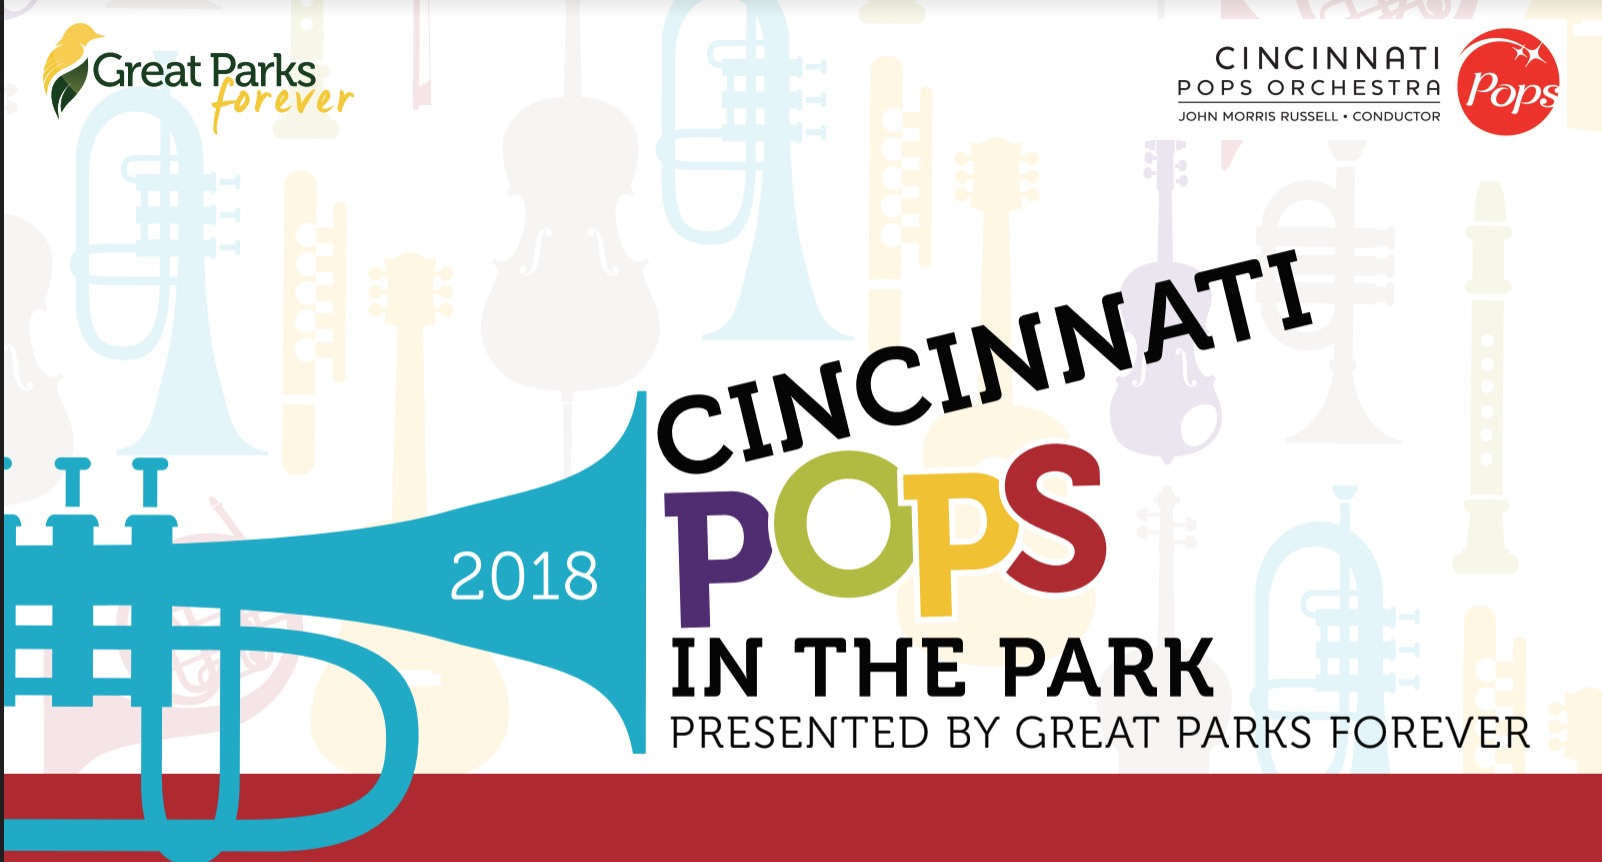 The Excitement of the Cincinnati Pops Returns to the Great Outdoors